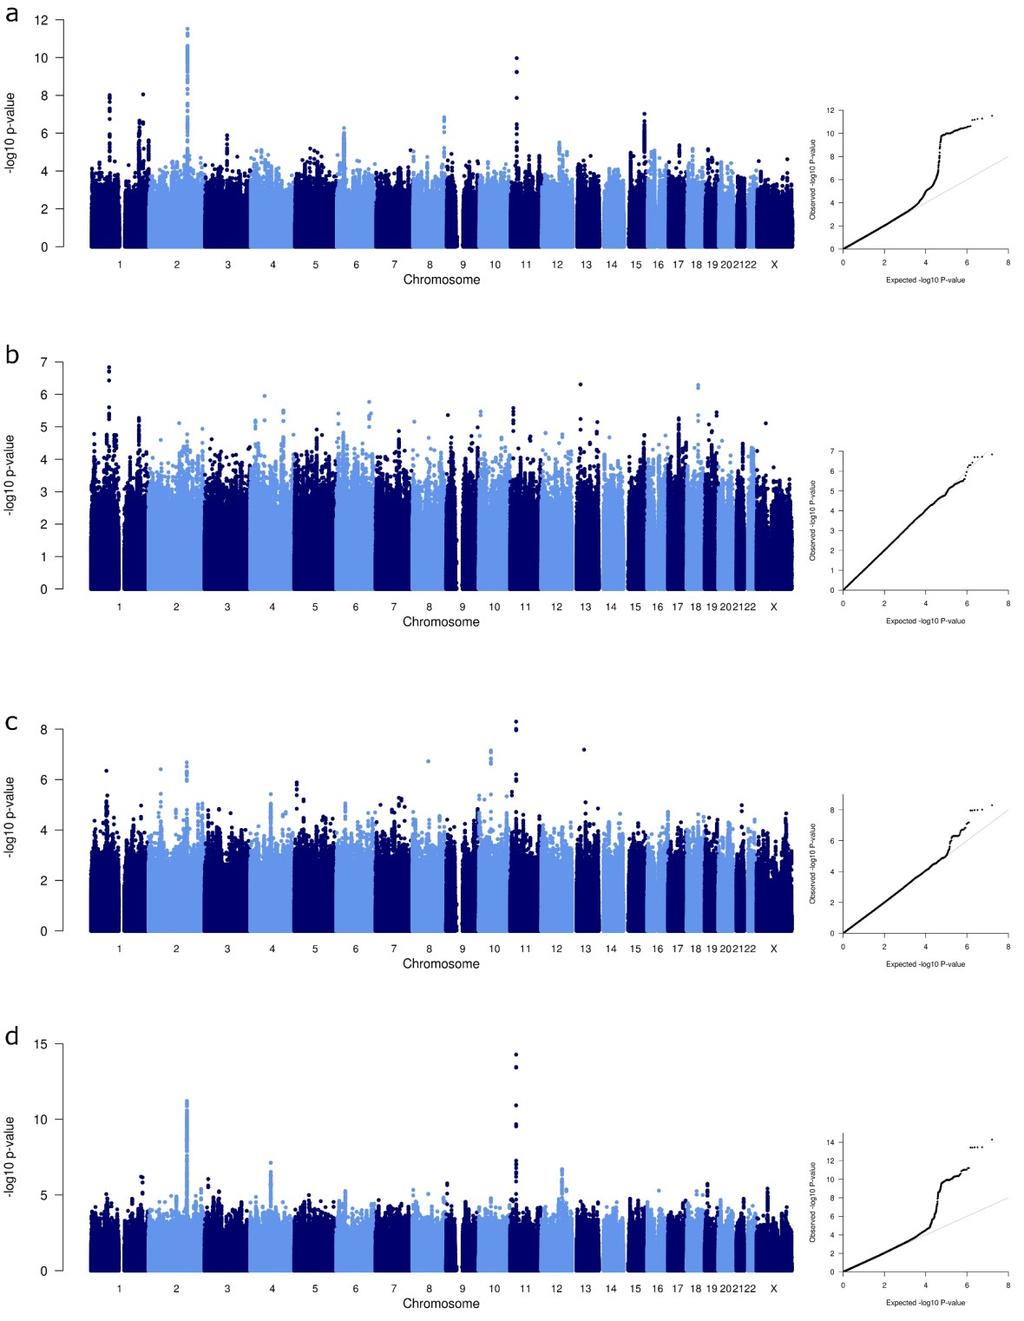 Supplementary Figure 2. Manhattan plots of log10 P values across the chromosomes (left panel) and corresponding quantile-quantile plots of observed versus expected log10 P values (right panel).